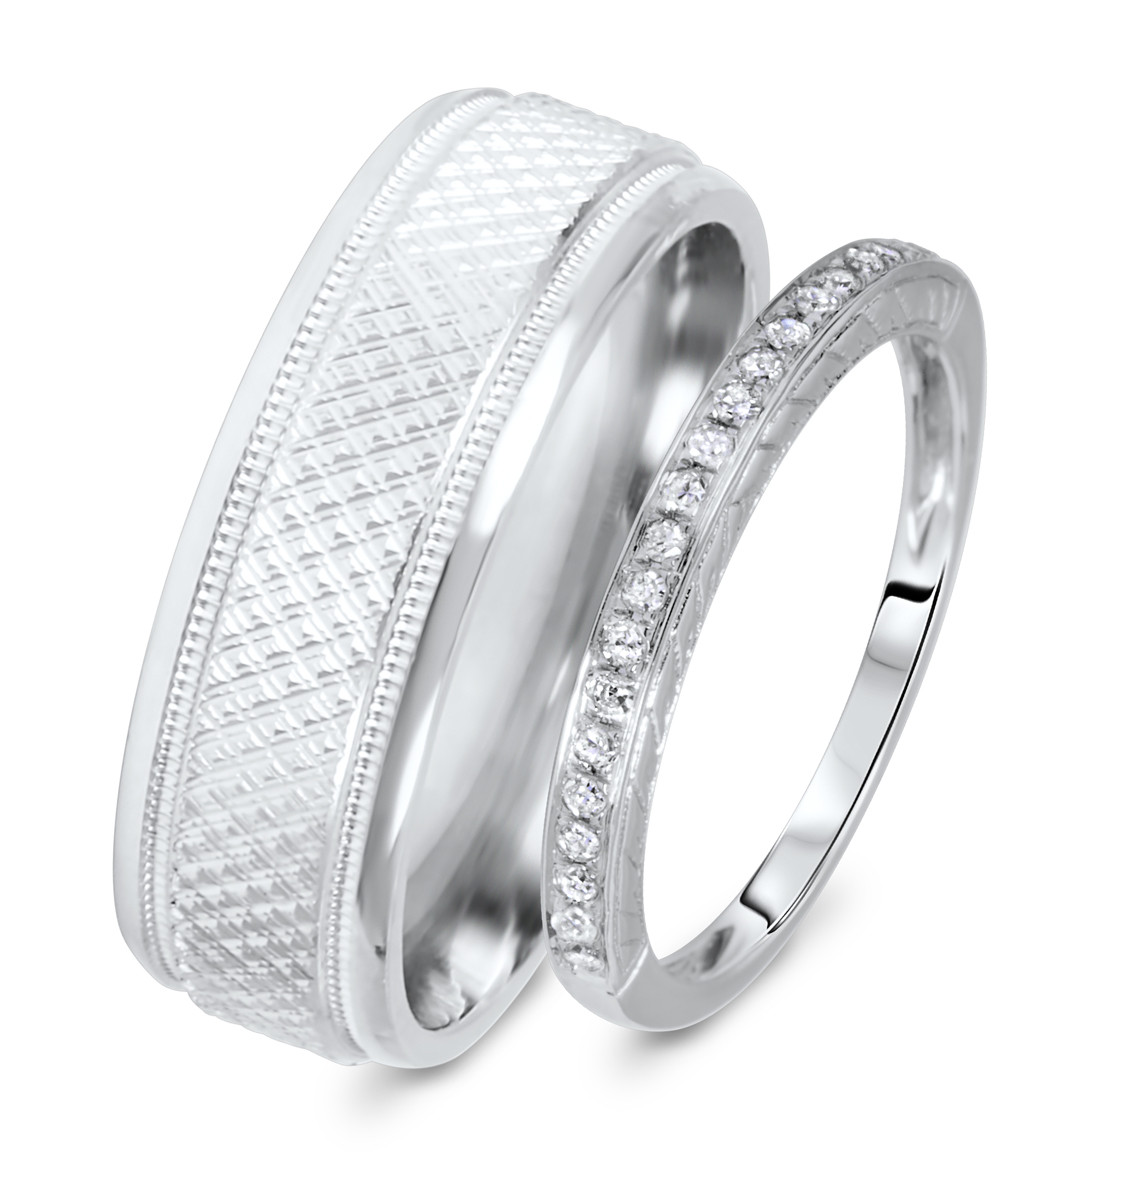 White Gold Wedding Ring Sets His And Hers
 3 Bud His and Hers Wedding Ring Sets Wedding Ideas